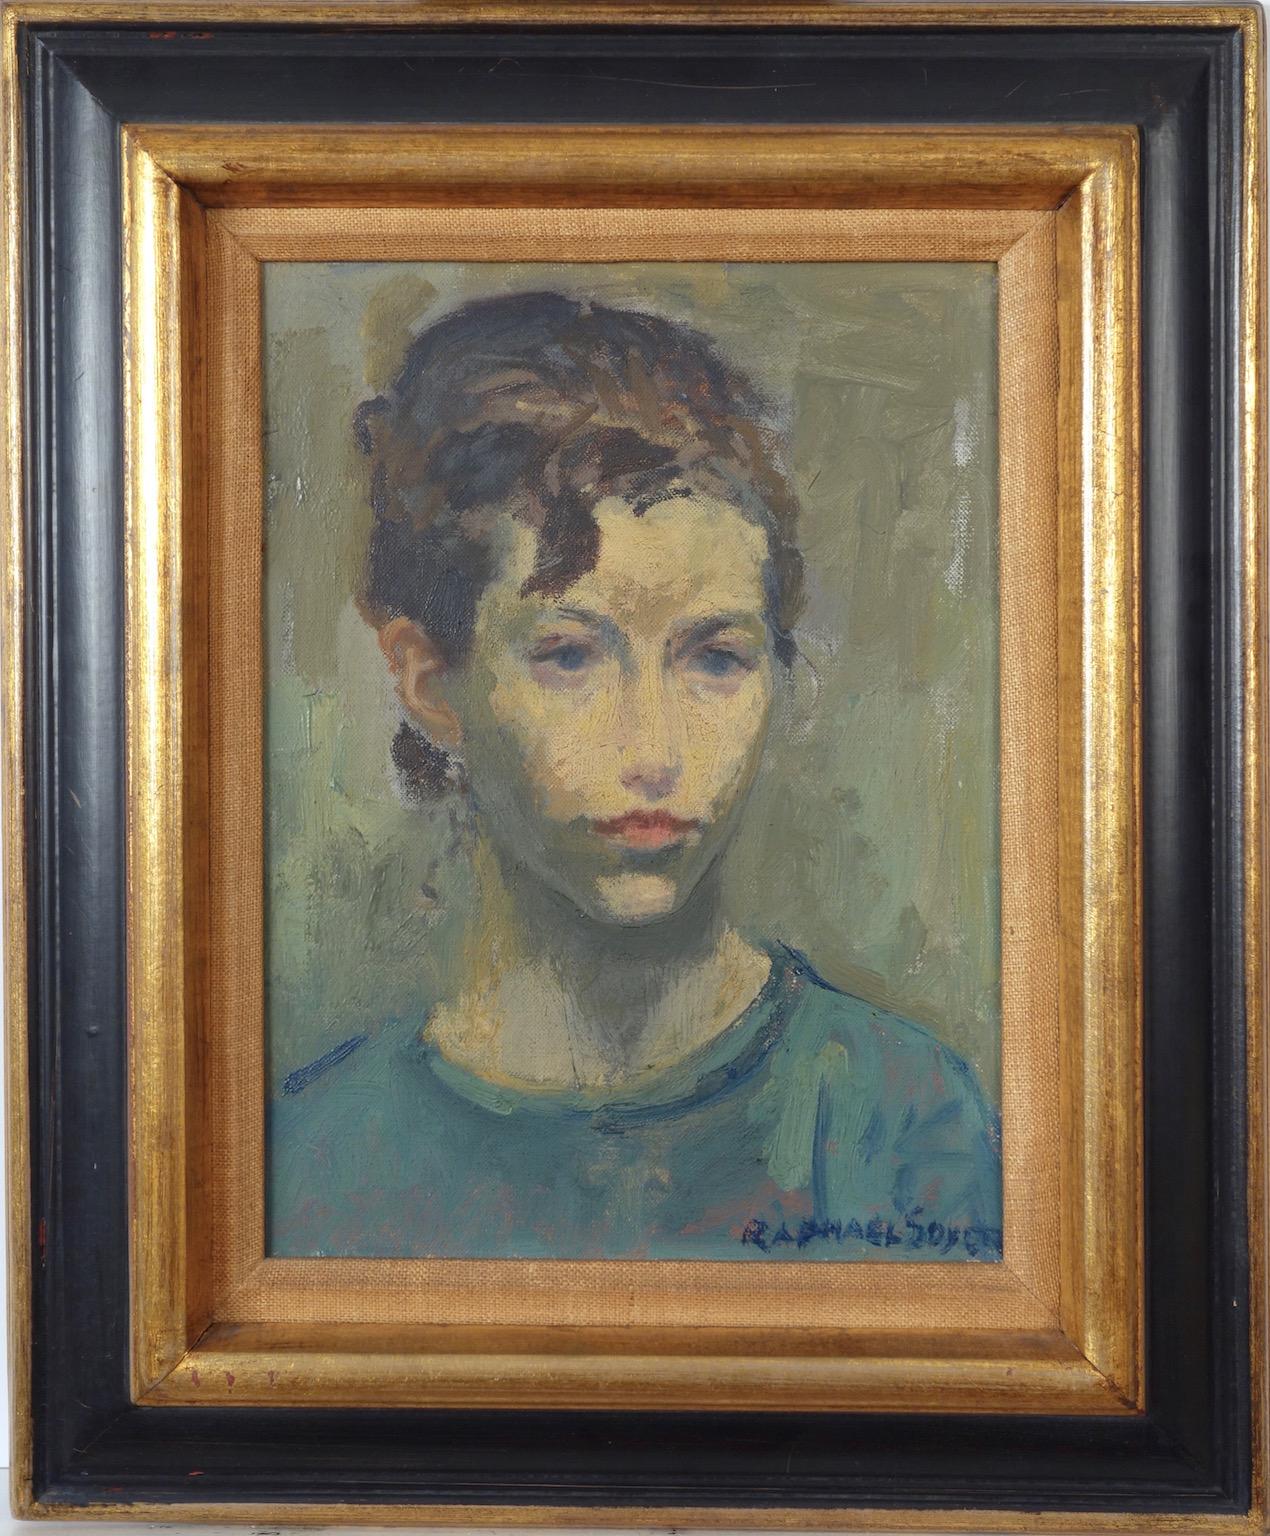 Raphael Soyer Figurative Painting - Portrait of a Young Woman